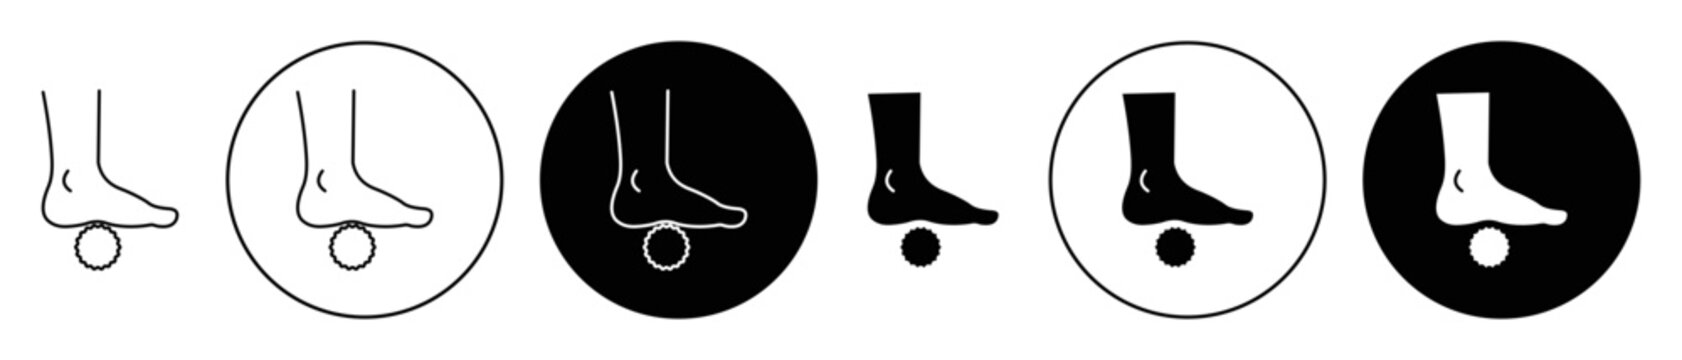 Foot massage orthopedic ball vector icon set in black filled and outlined style.